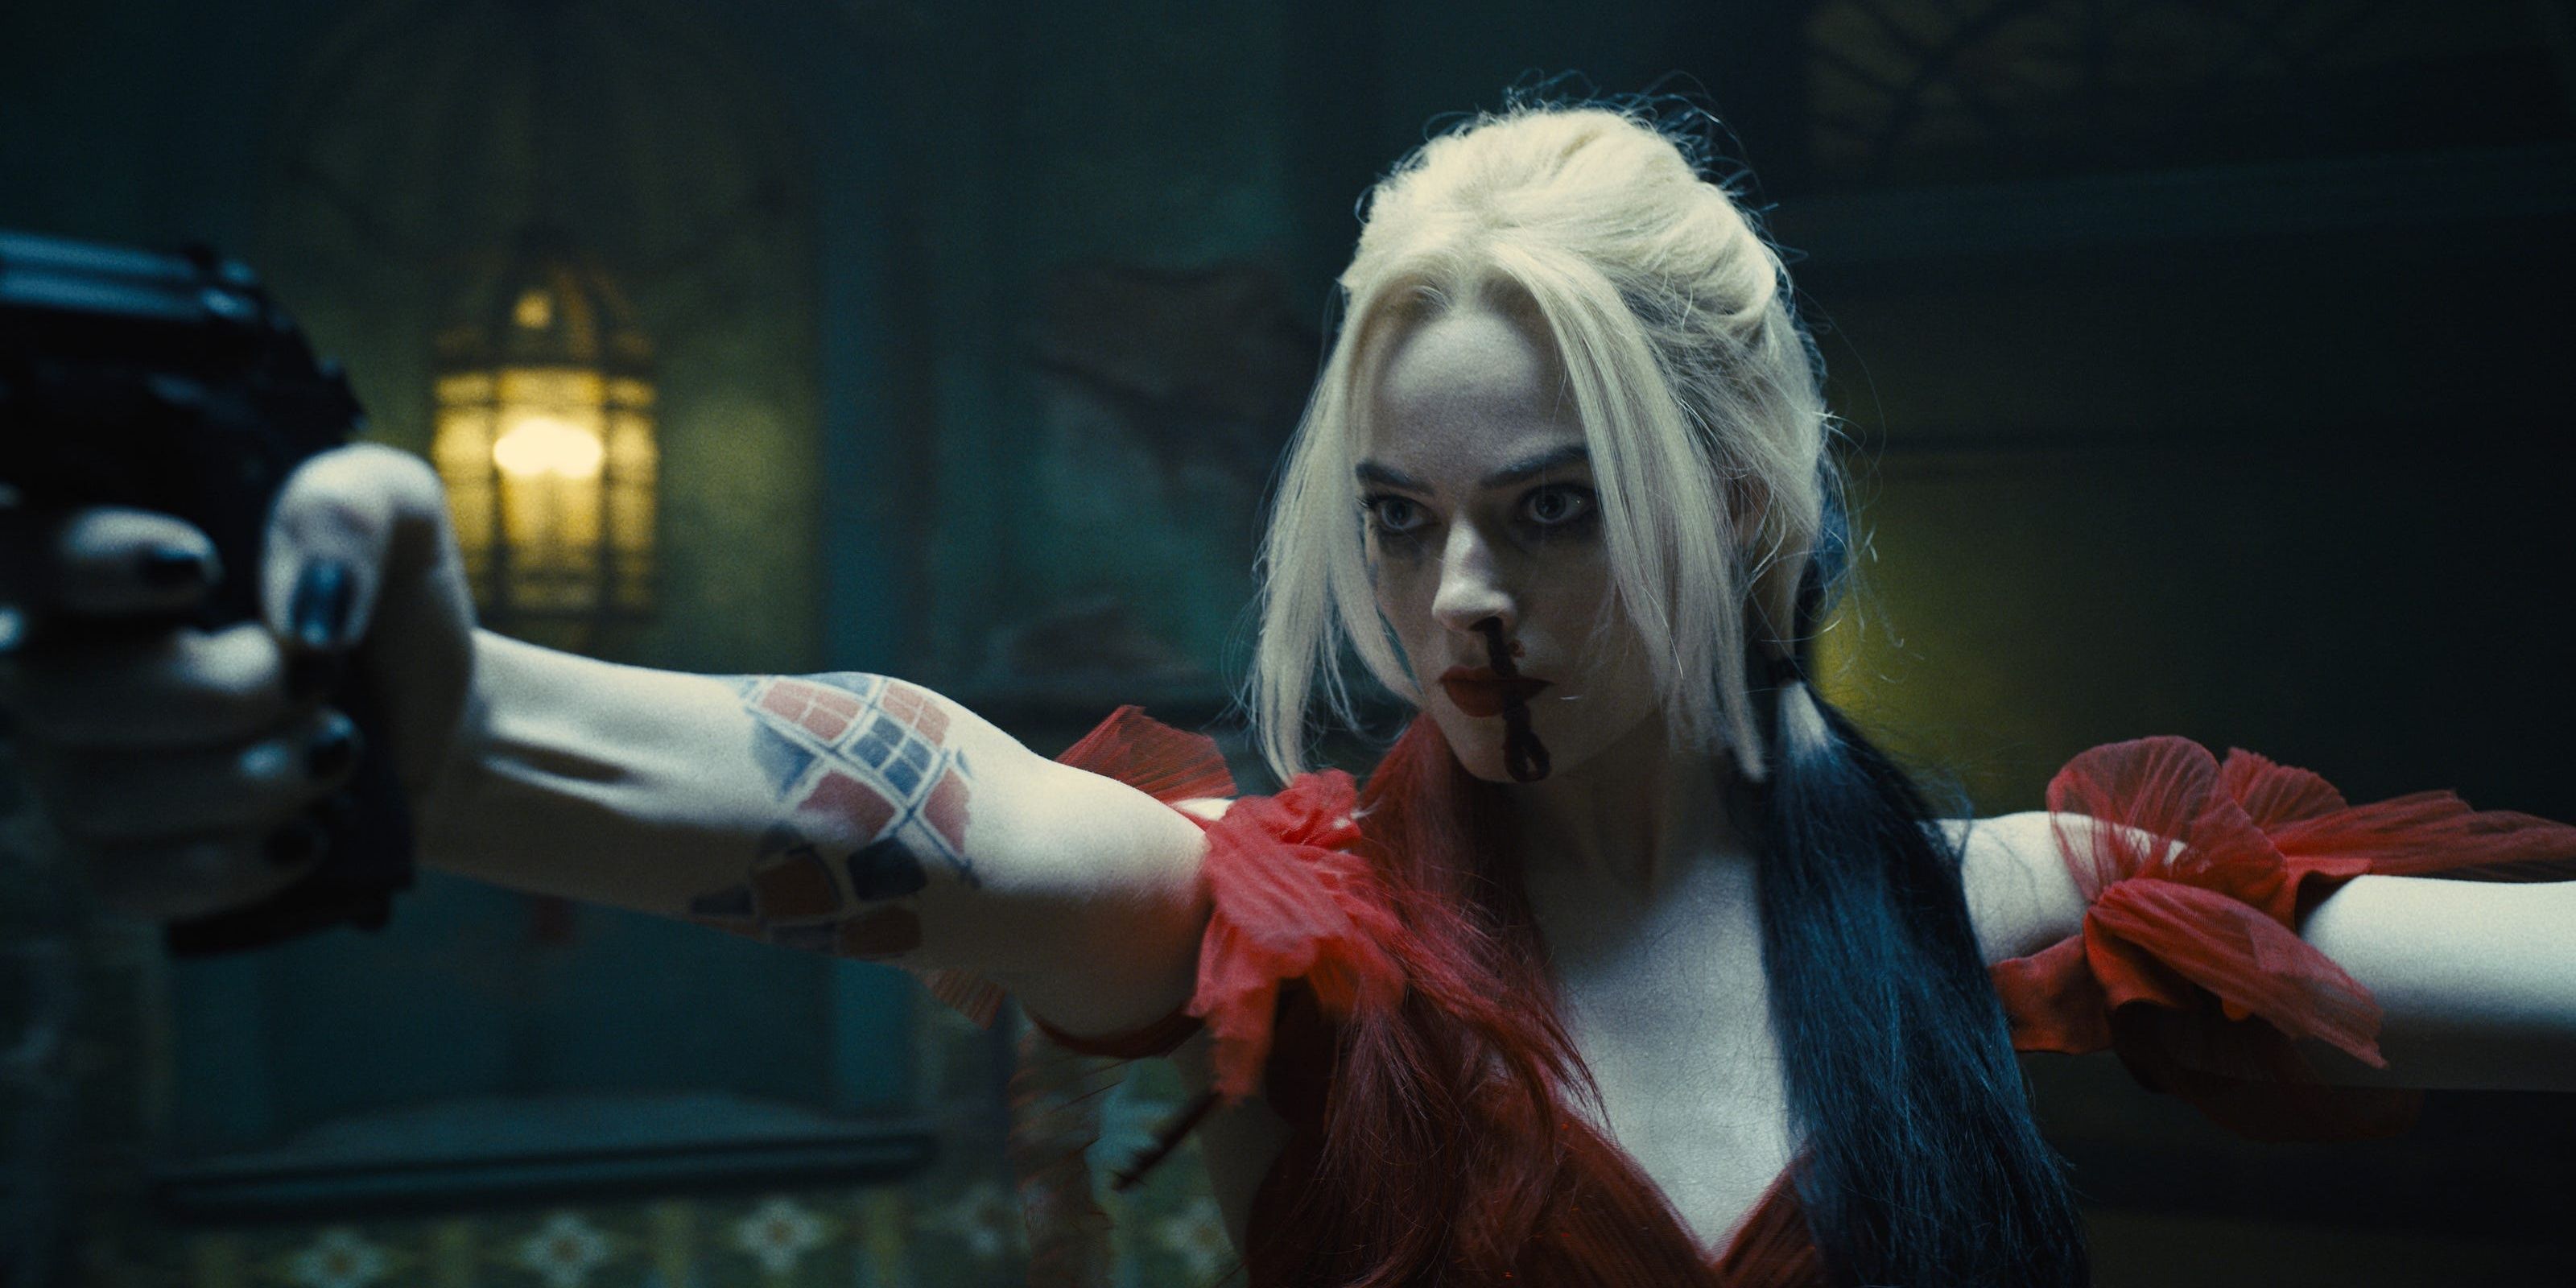 Harley Quinns Breakout Fight Scene In The Suicide Squad Was Inspired By Lollipop Chainsaw